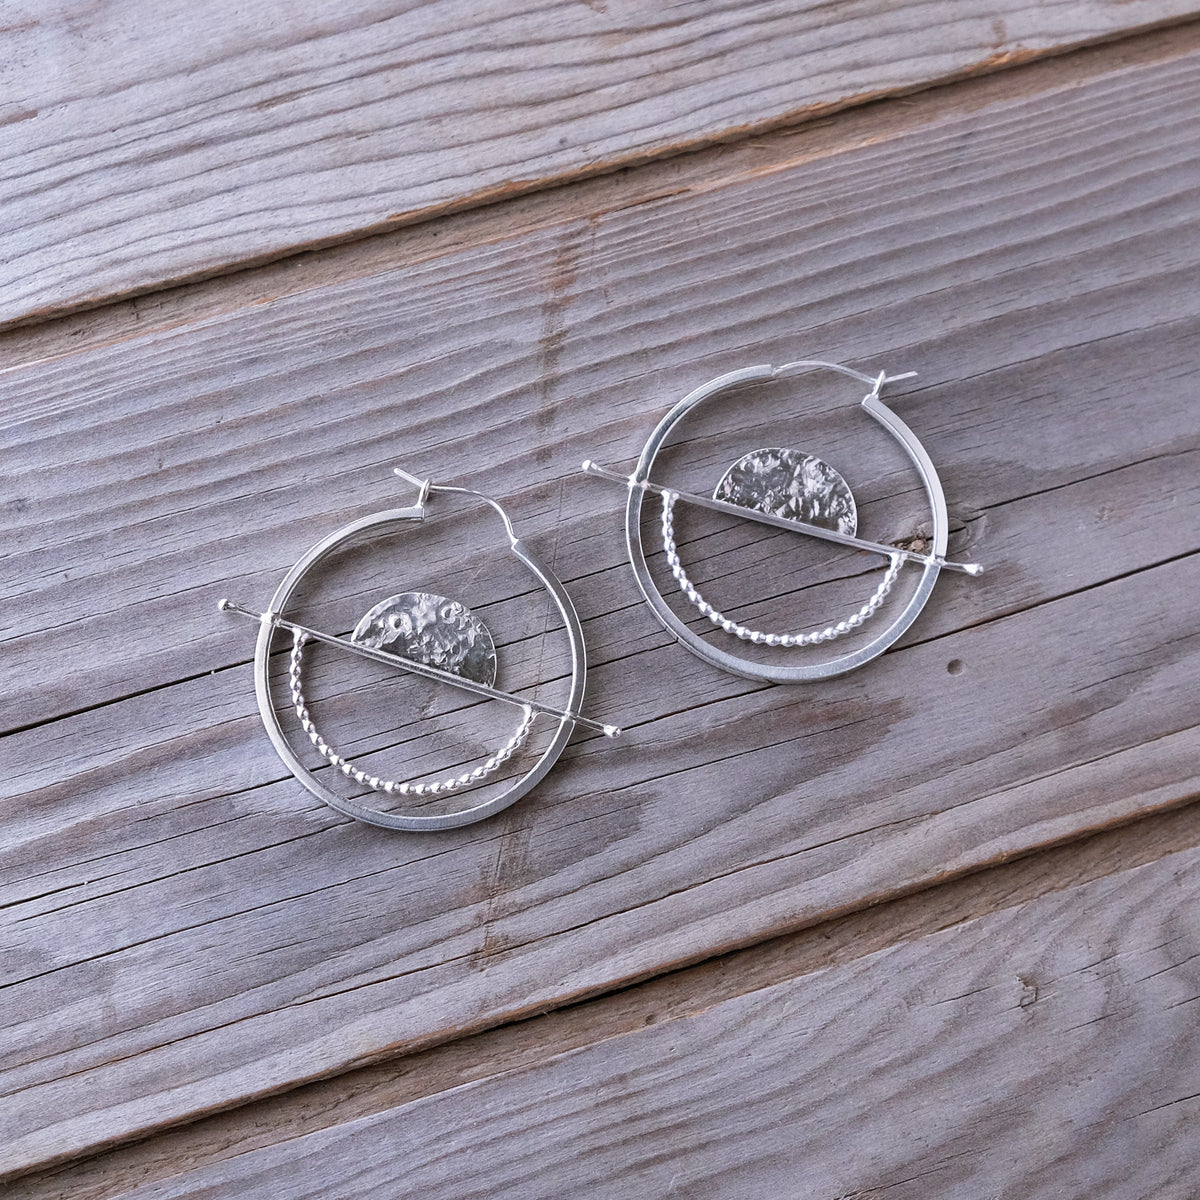 Geometric Sterling Silver Statement Full Balance Hoop Earrings — Sun Moon Horizon - Textured Hammered Silver -  Glass Sky Jewelry - Handmade in Columbus Ohio by artist Andrea Kaiser